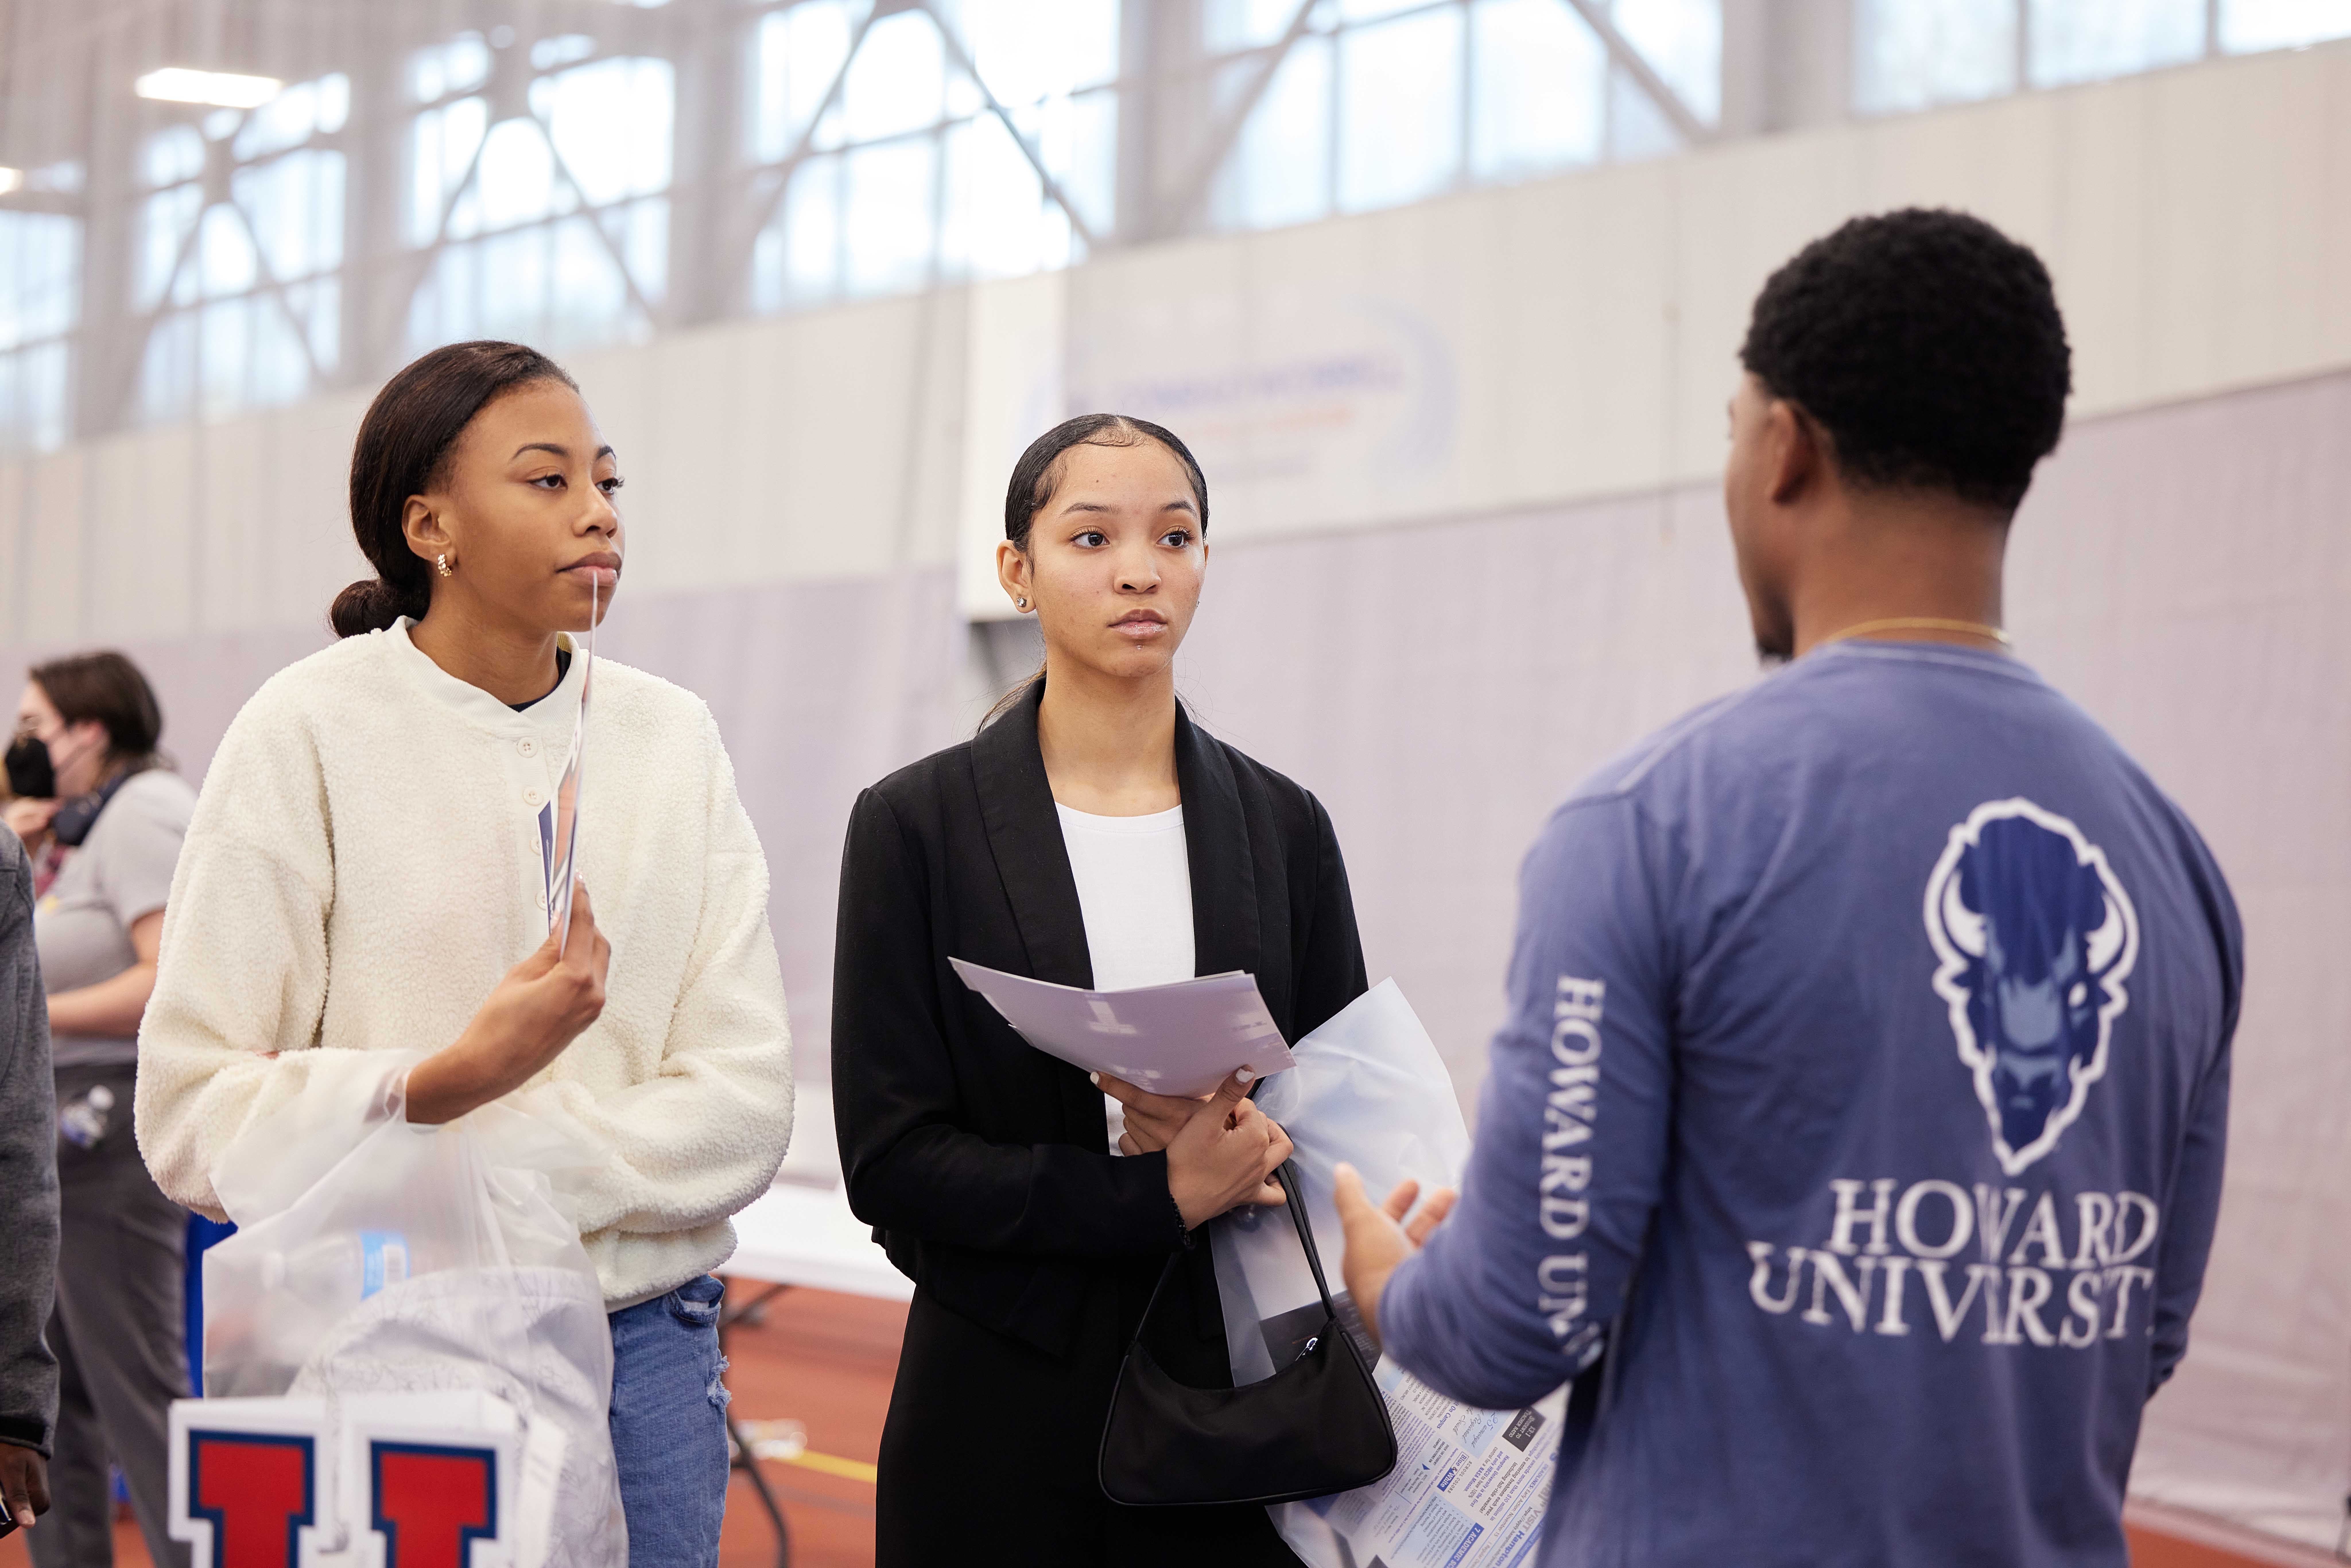 In this photo, you can see Laniya and Madison listening intently to a Howard University college representative. Both of them are young Black women and are dressed nicely. Madison has on a black suit with a white blouse and Laniya is wearing a nice white sweater with jeans. They both are holding various bags and printed materials from different universities and colleges at the fair.